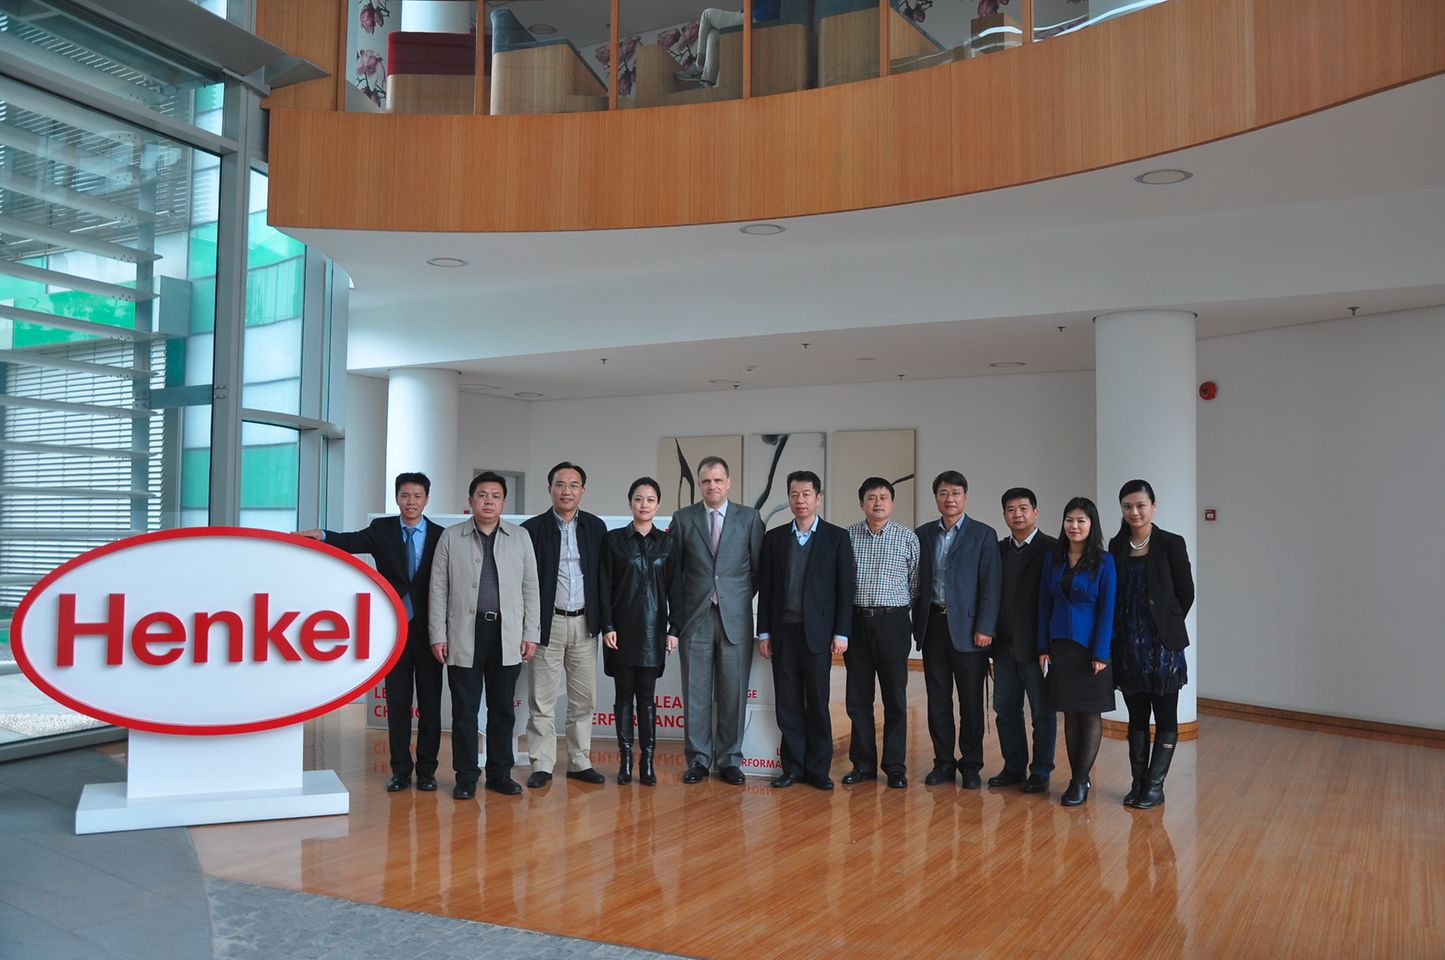 Secretary General of CPF Ao Wennan and senior Henkel adhesives executives led by Thomas Auris (VP Asia-Pacific & Global Head of Non Woven & Shoe Business) hosted the CPF Audit meeting to become the official “China Packaging Training Base” of CPF.